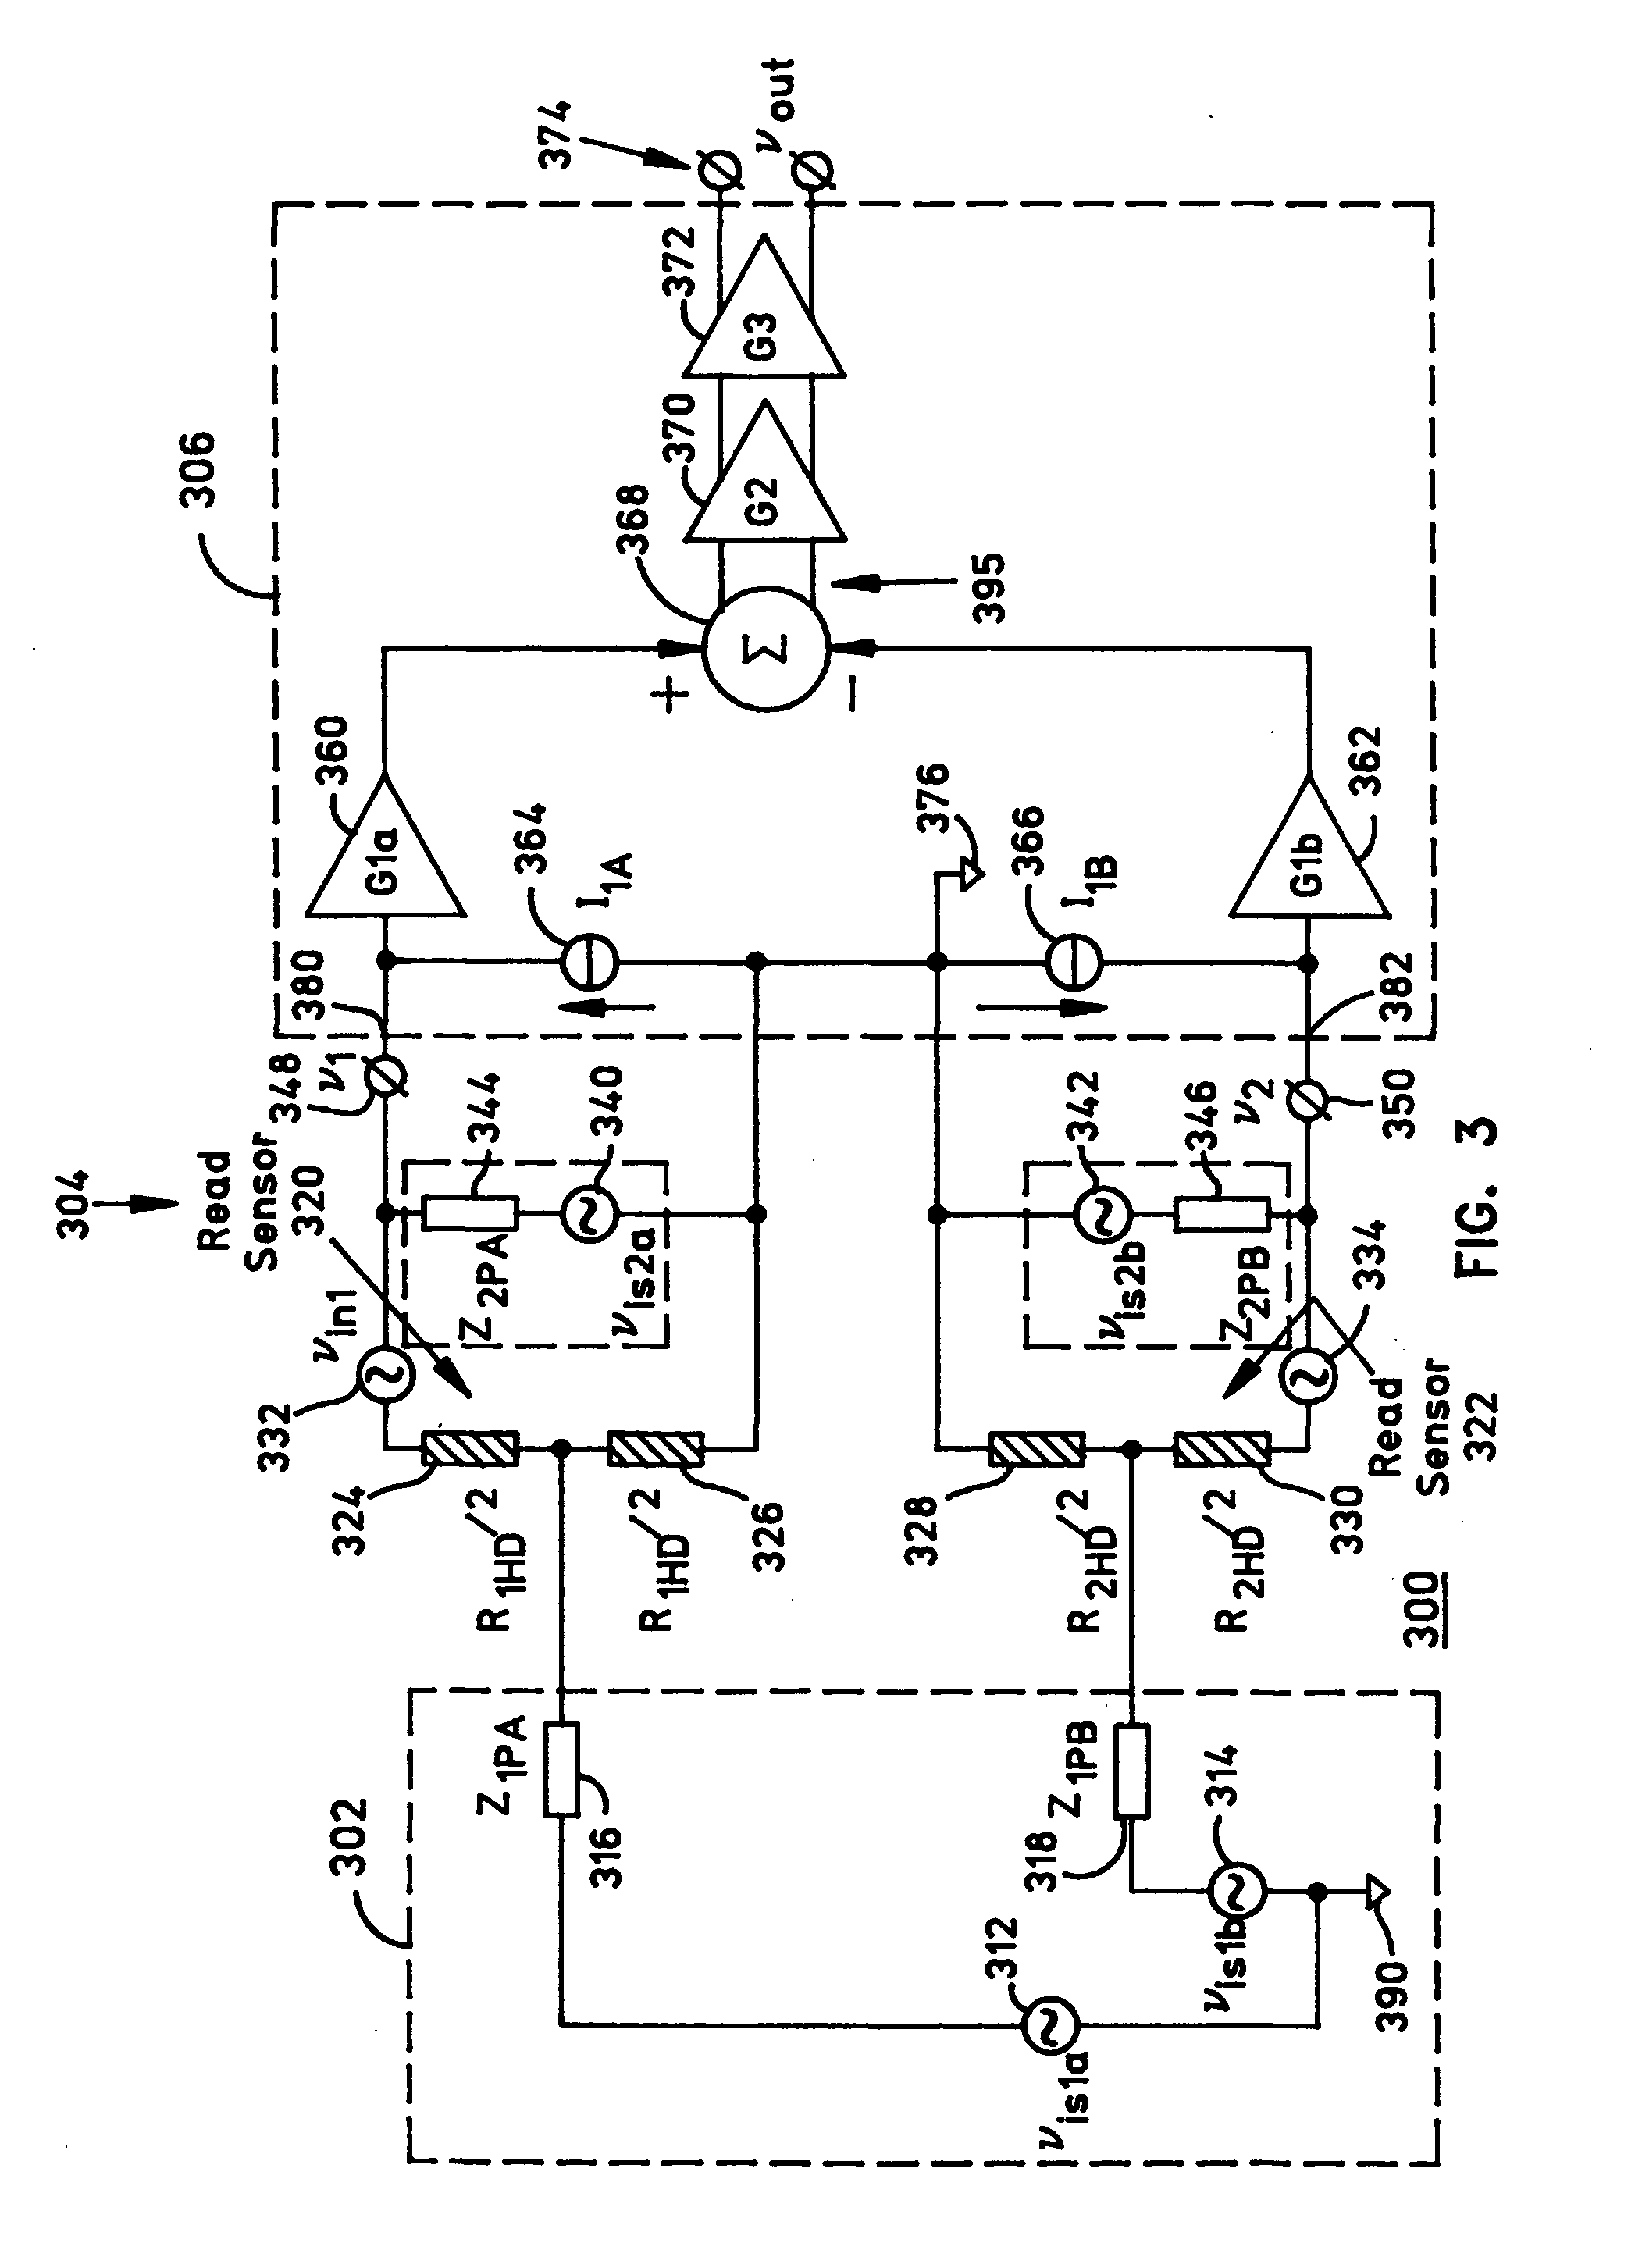 Preamplifier circuit with signal interference cancellation suitable for use in magnetic storage devices